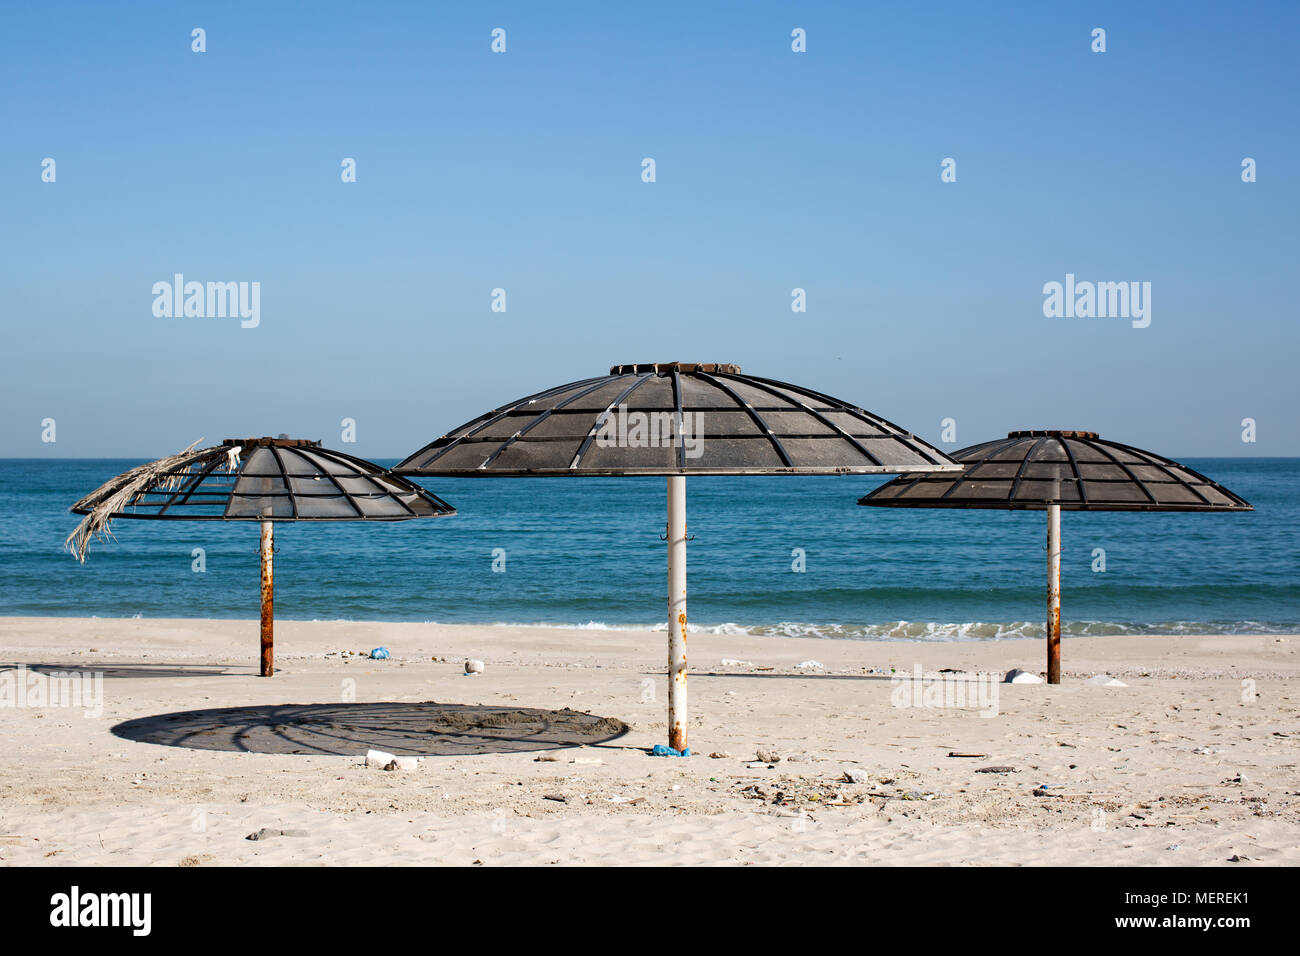 Umbrellas on a beach in Kuwait. Shade protection from the extreme heat in the Middle East. Stock Photo